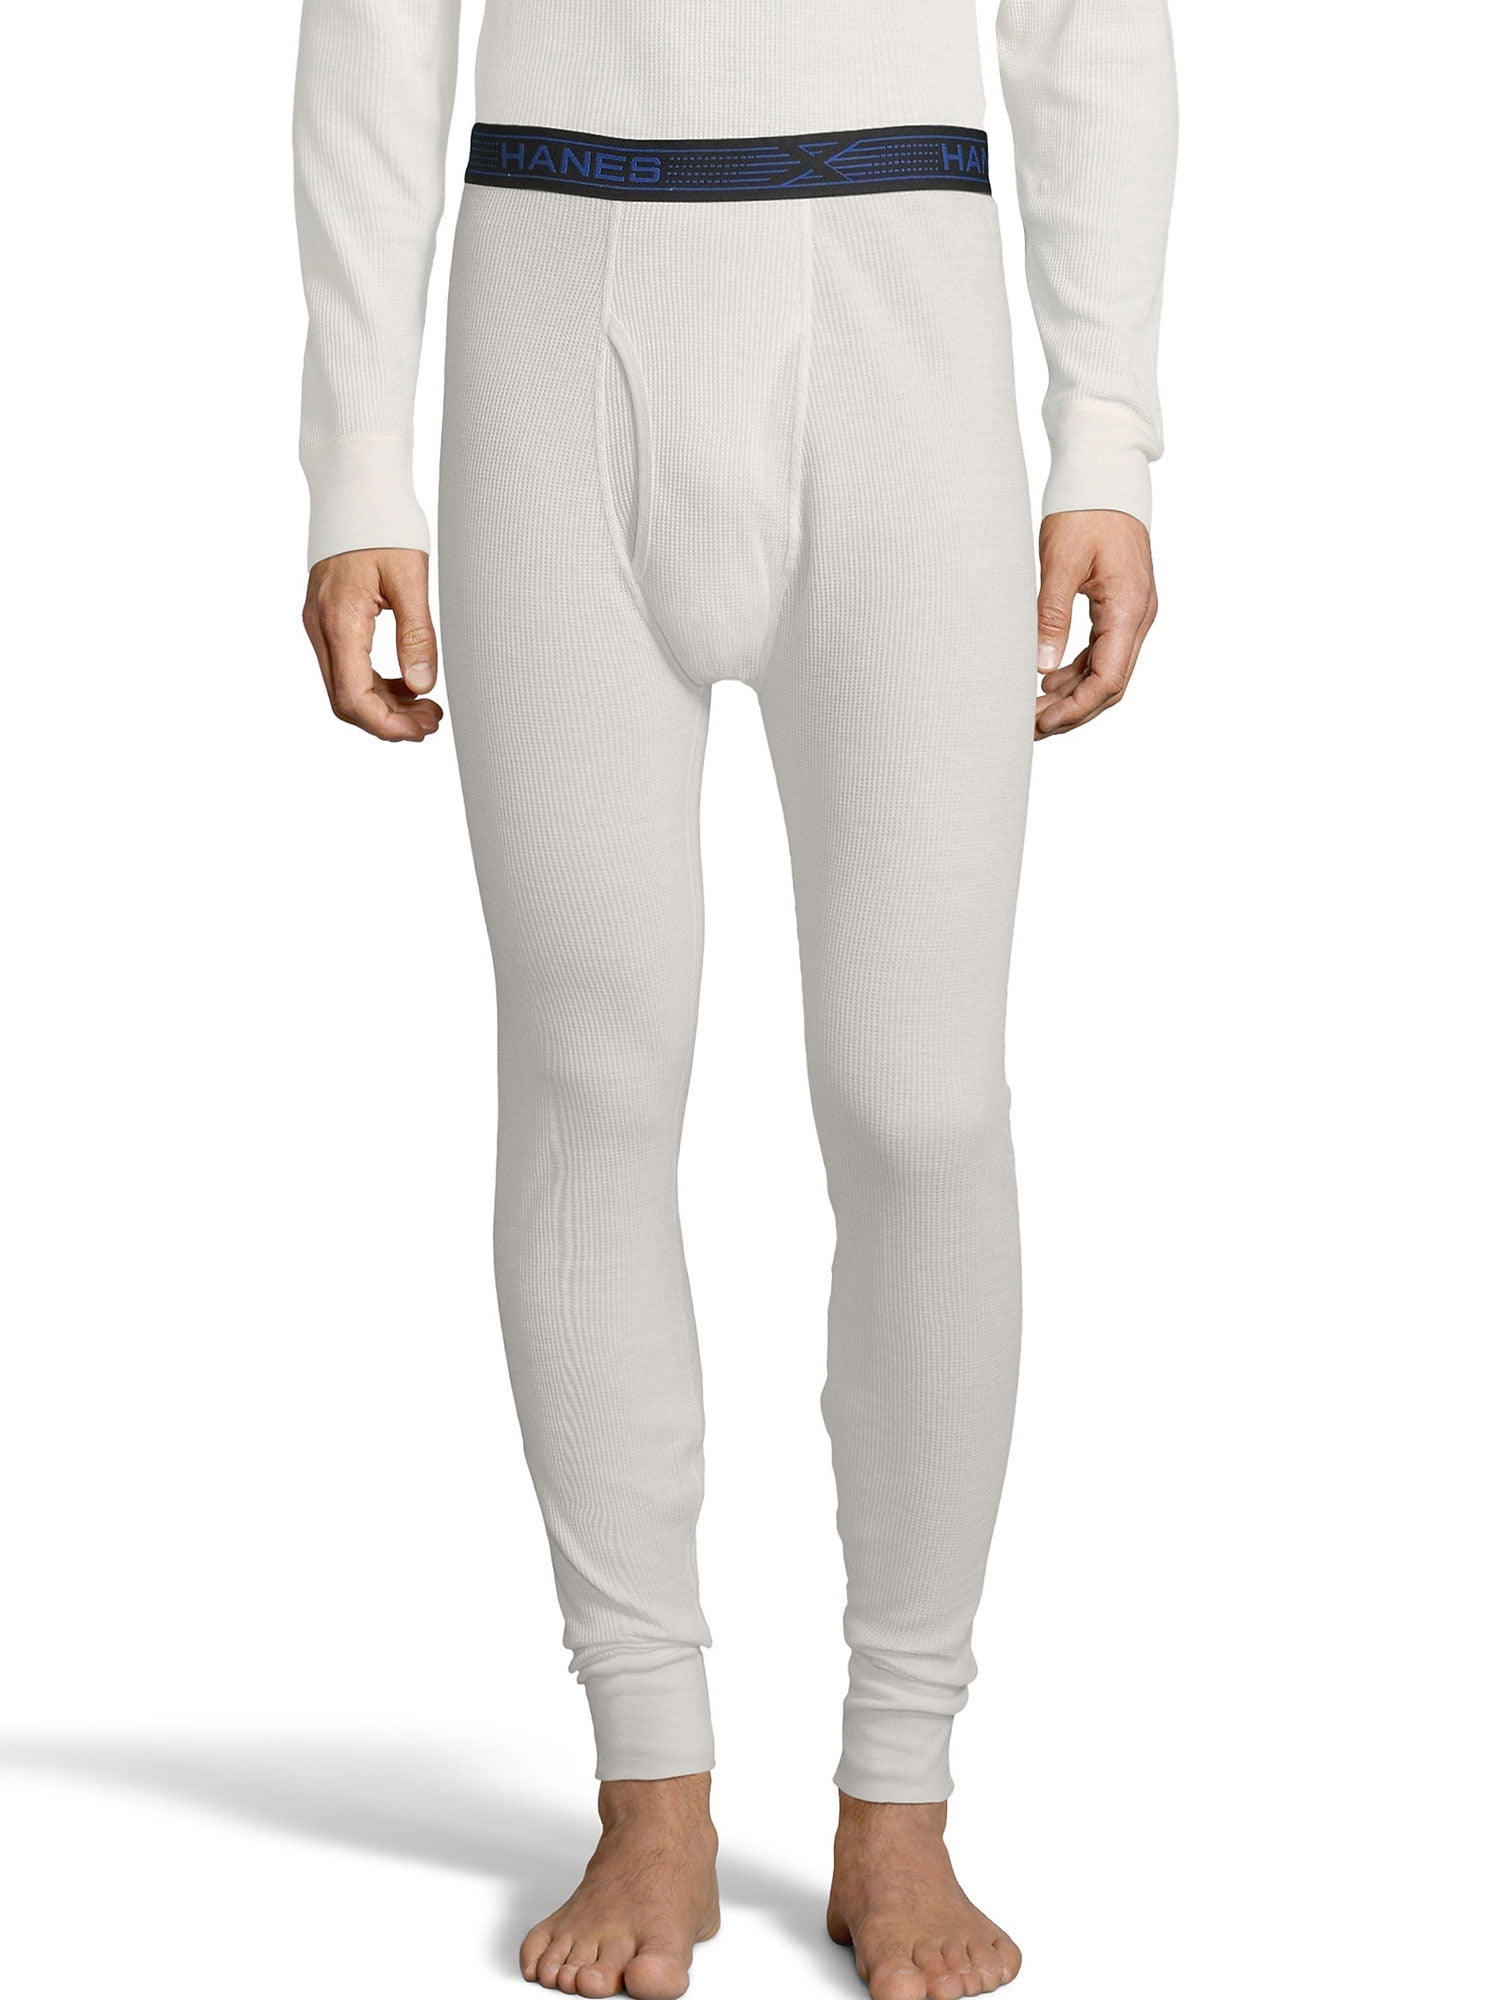 Hanes Boys X Temp Thermal Pant with Odor Control 